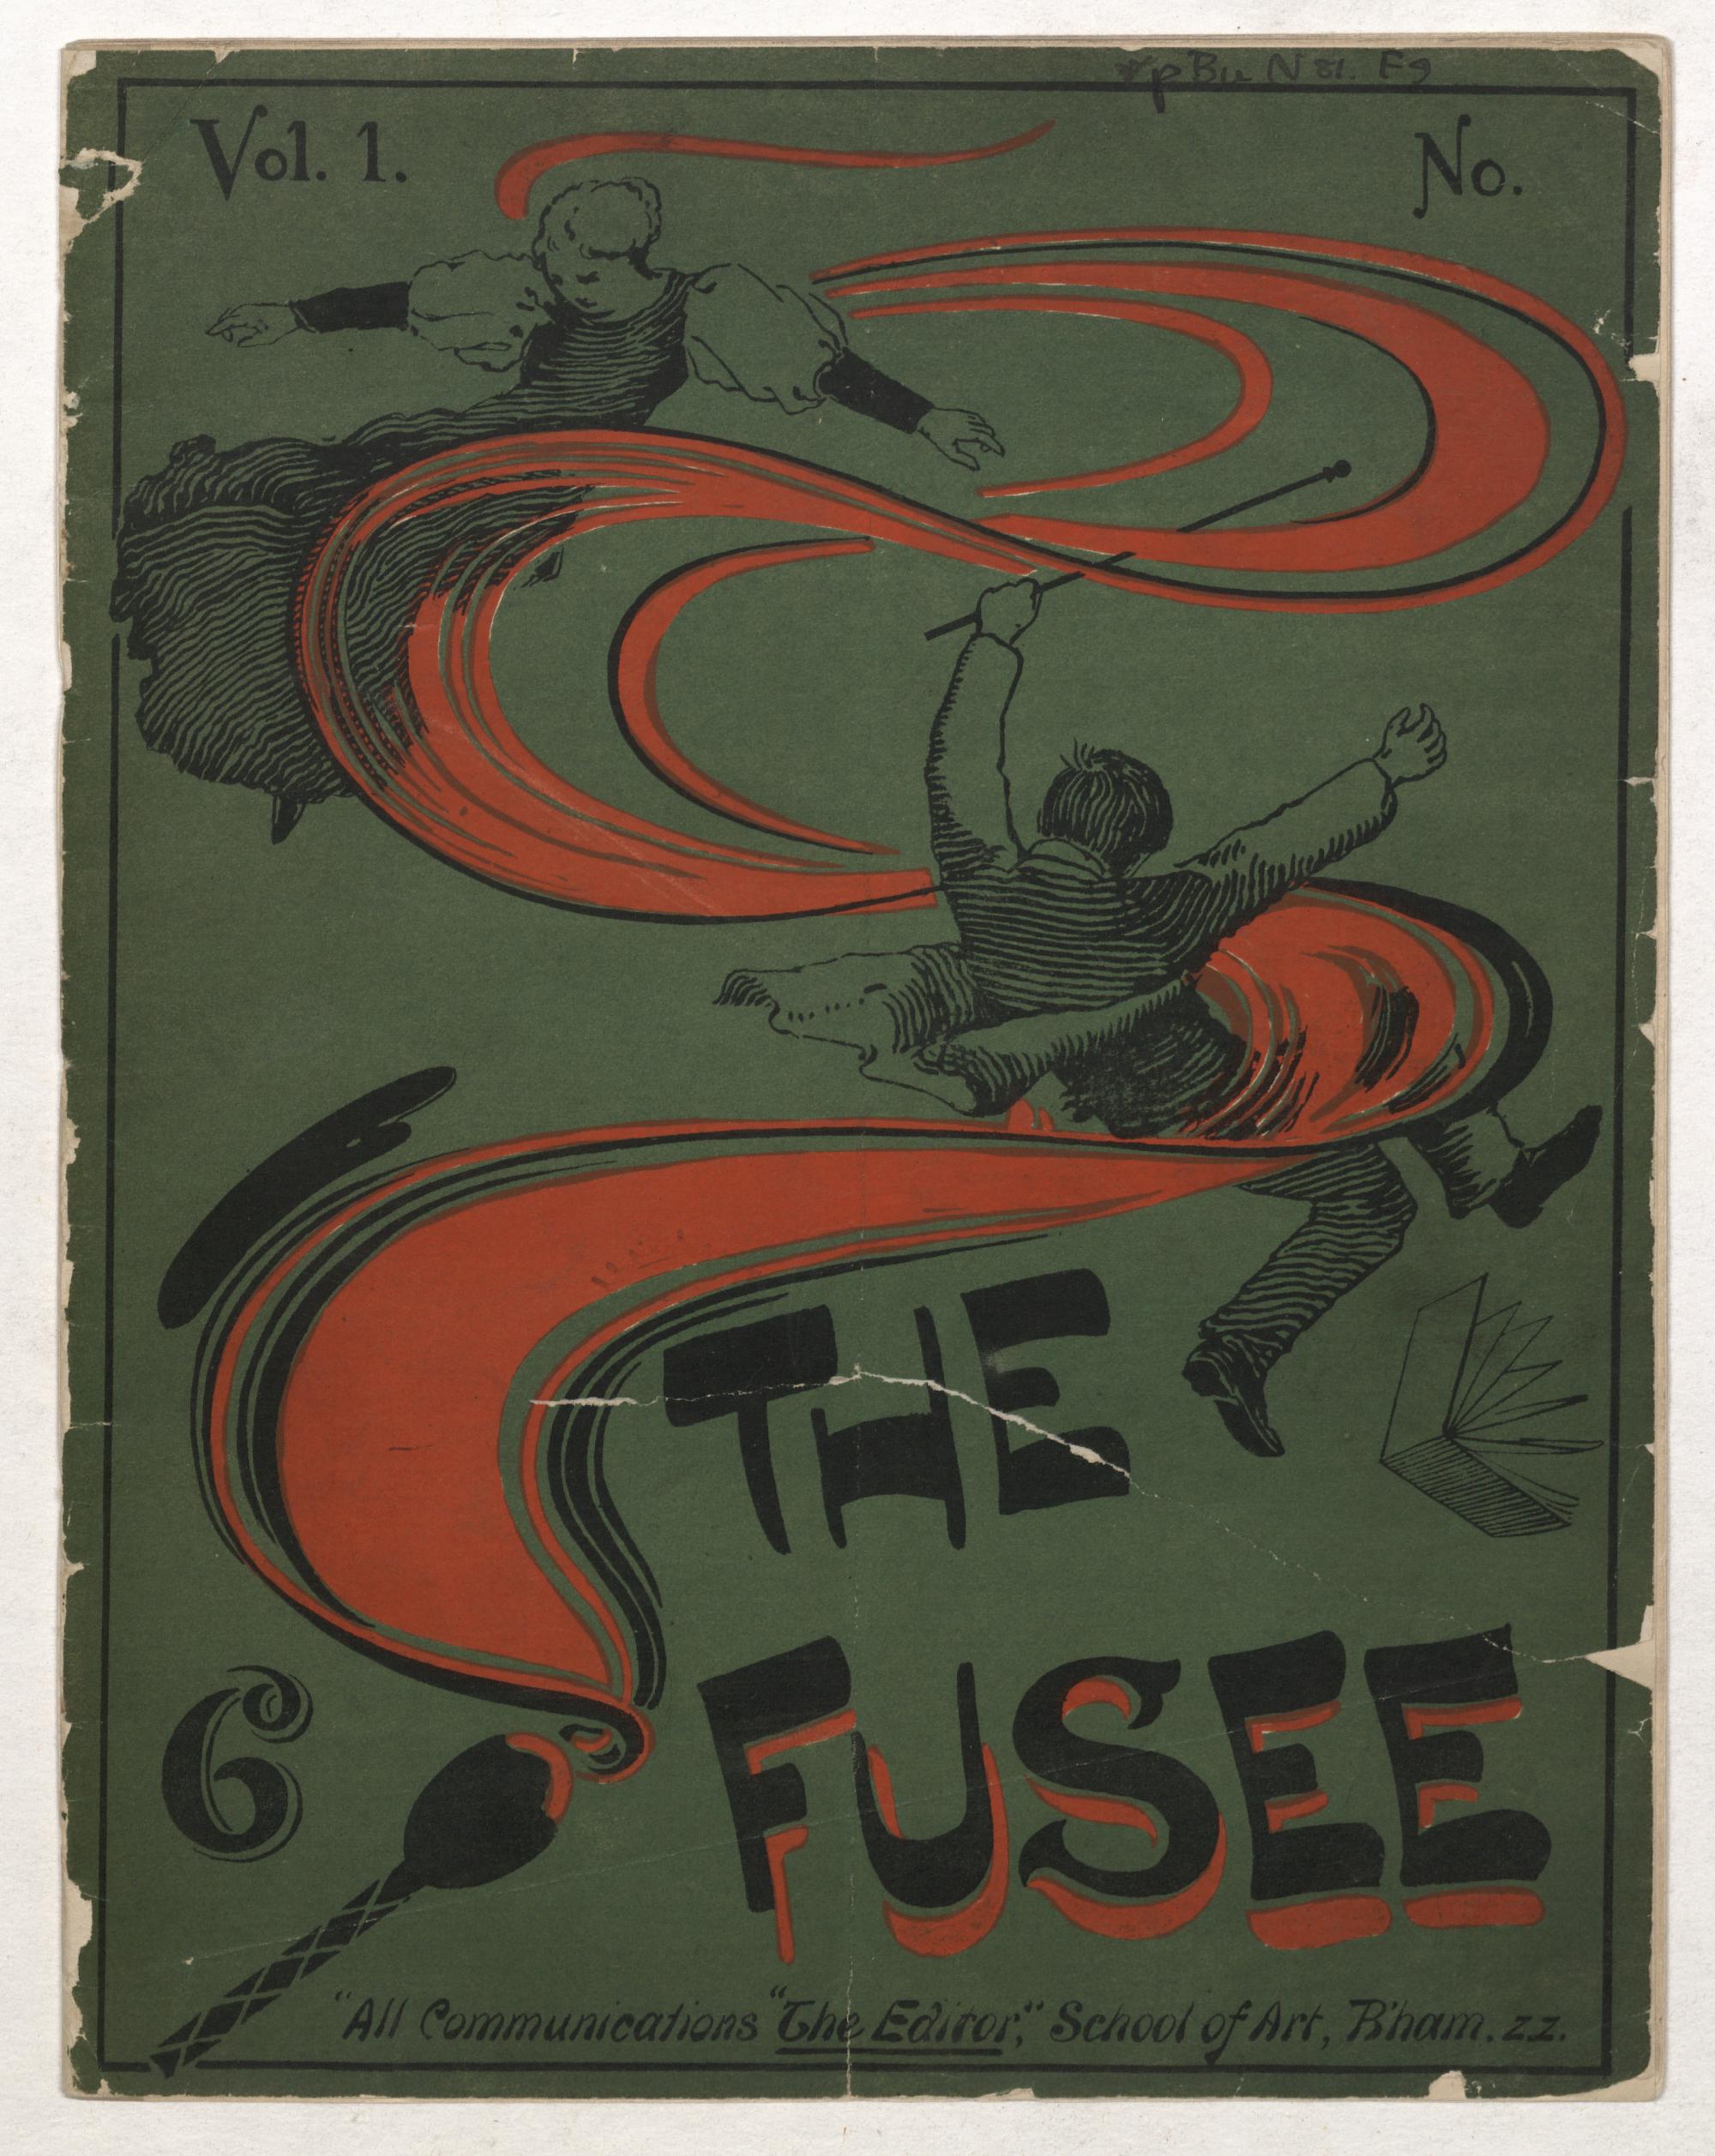 The Fusee Cover